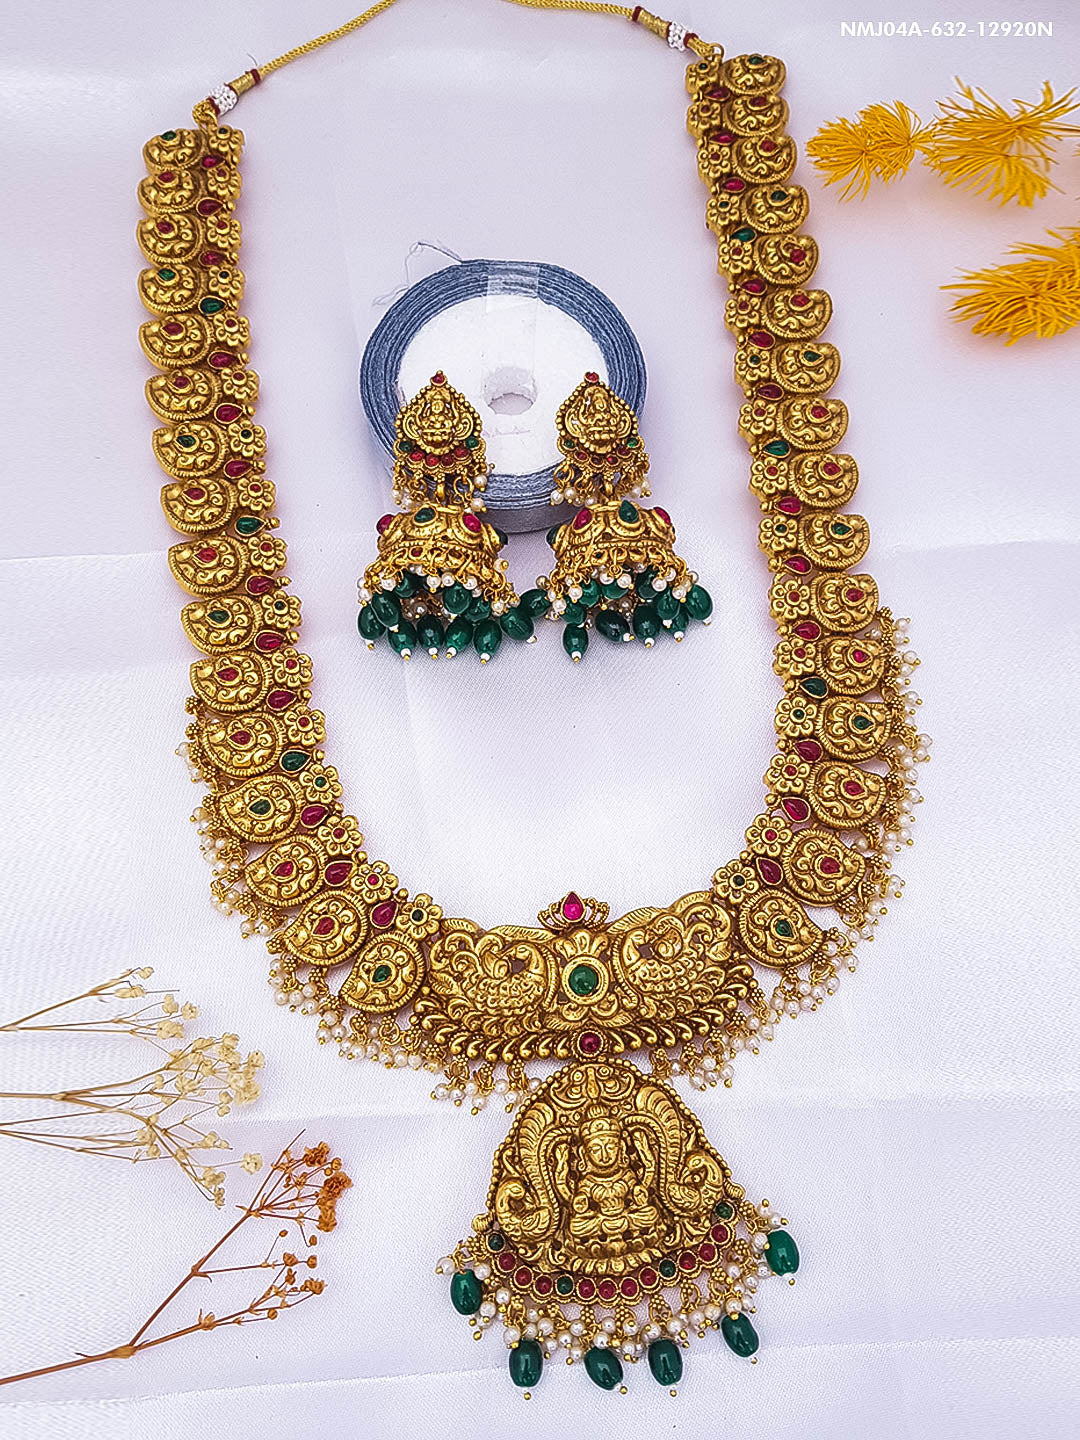 Gold Plated Temple Necklace Set with Multi Color Stones 12920N